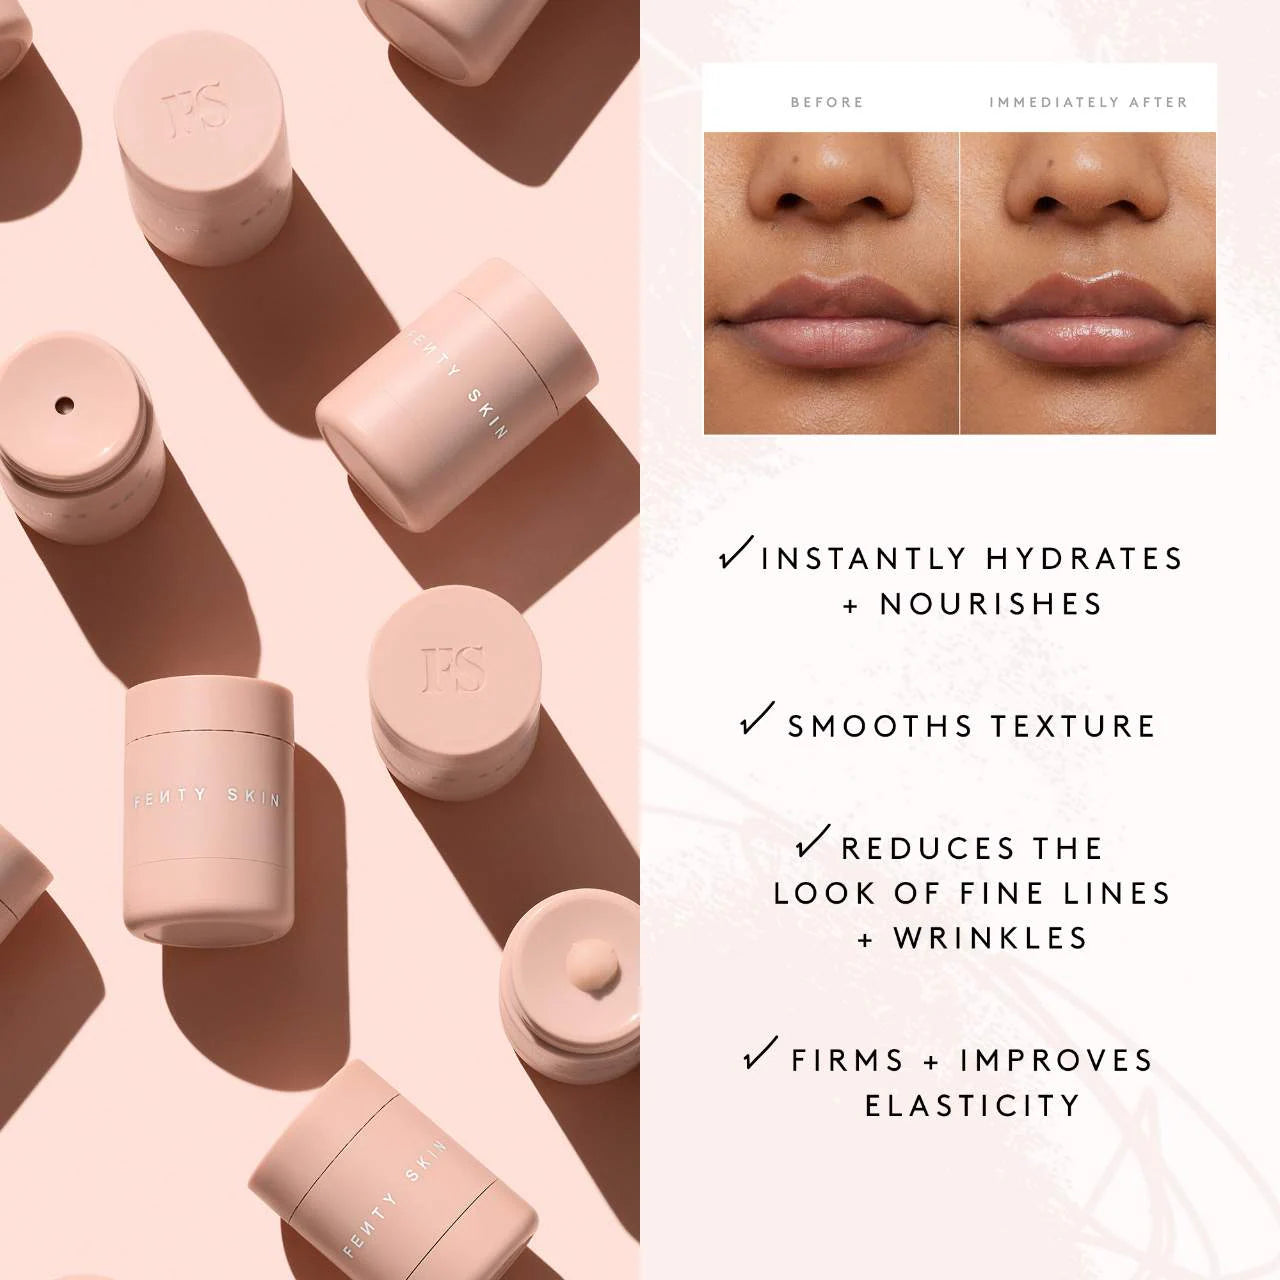 Fenty Skin - Plush Puddin'z Intensive Recovery Lip Mask Duo | Limited Edition